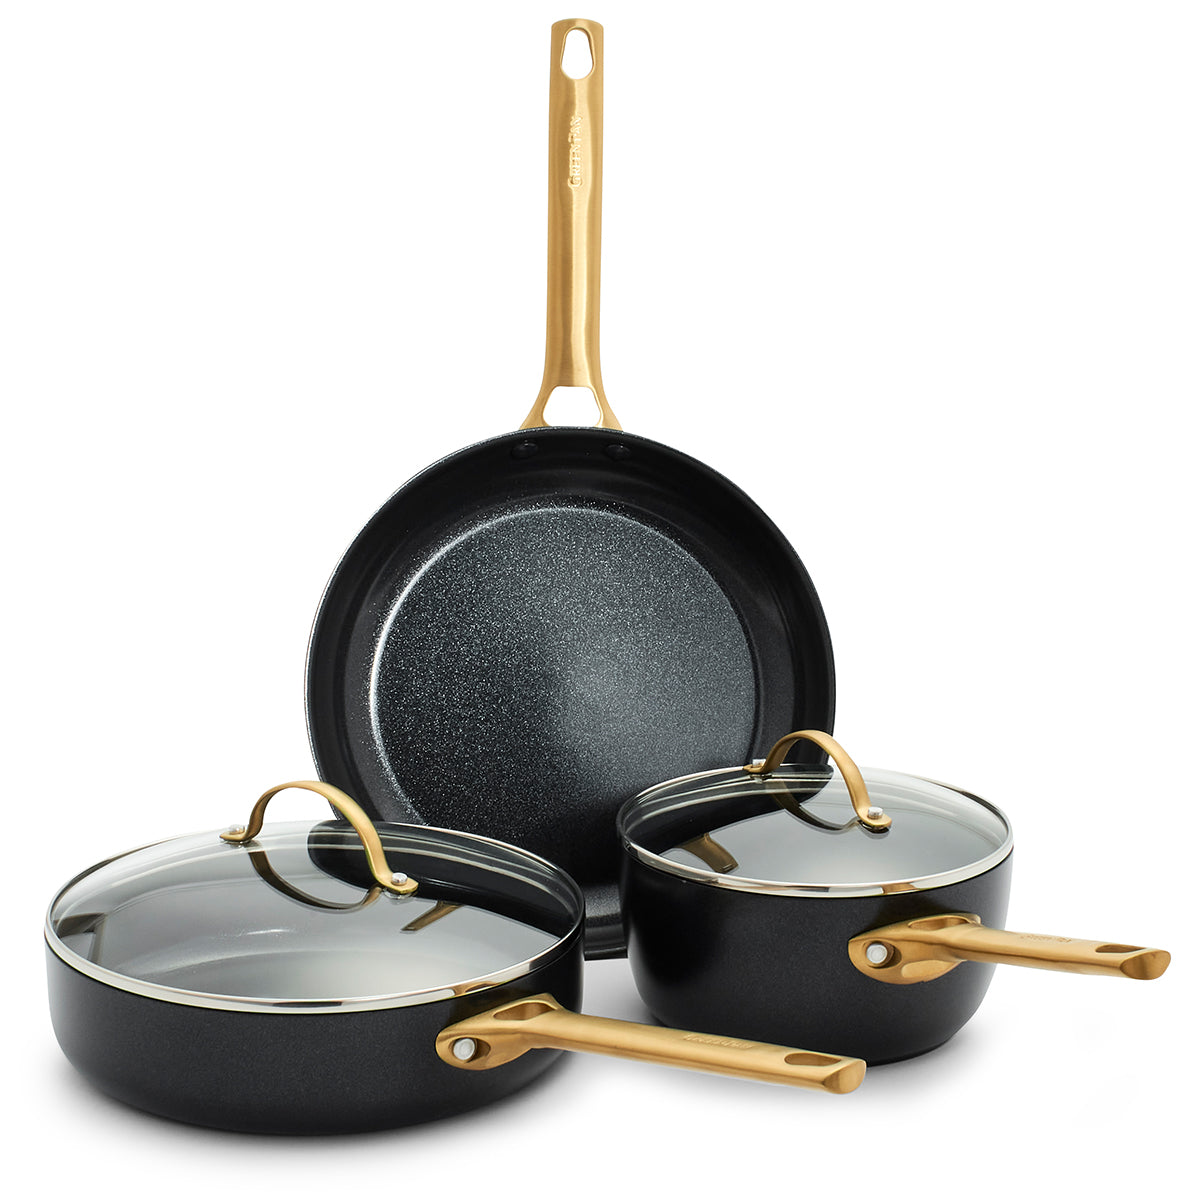 5Piece Ceramic Cookware Set-Non-Stick Frying Pots and Pans with